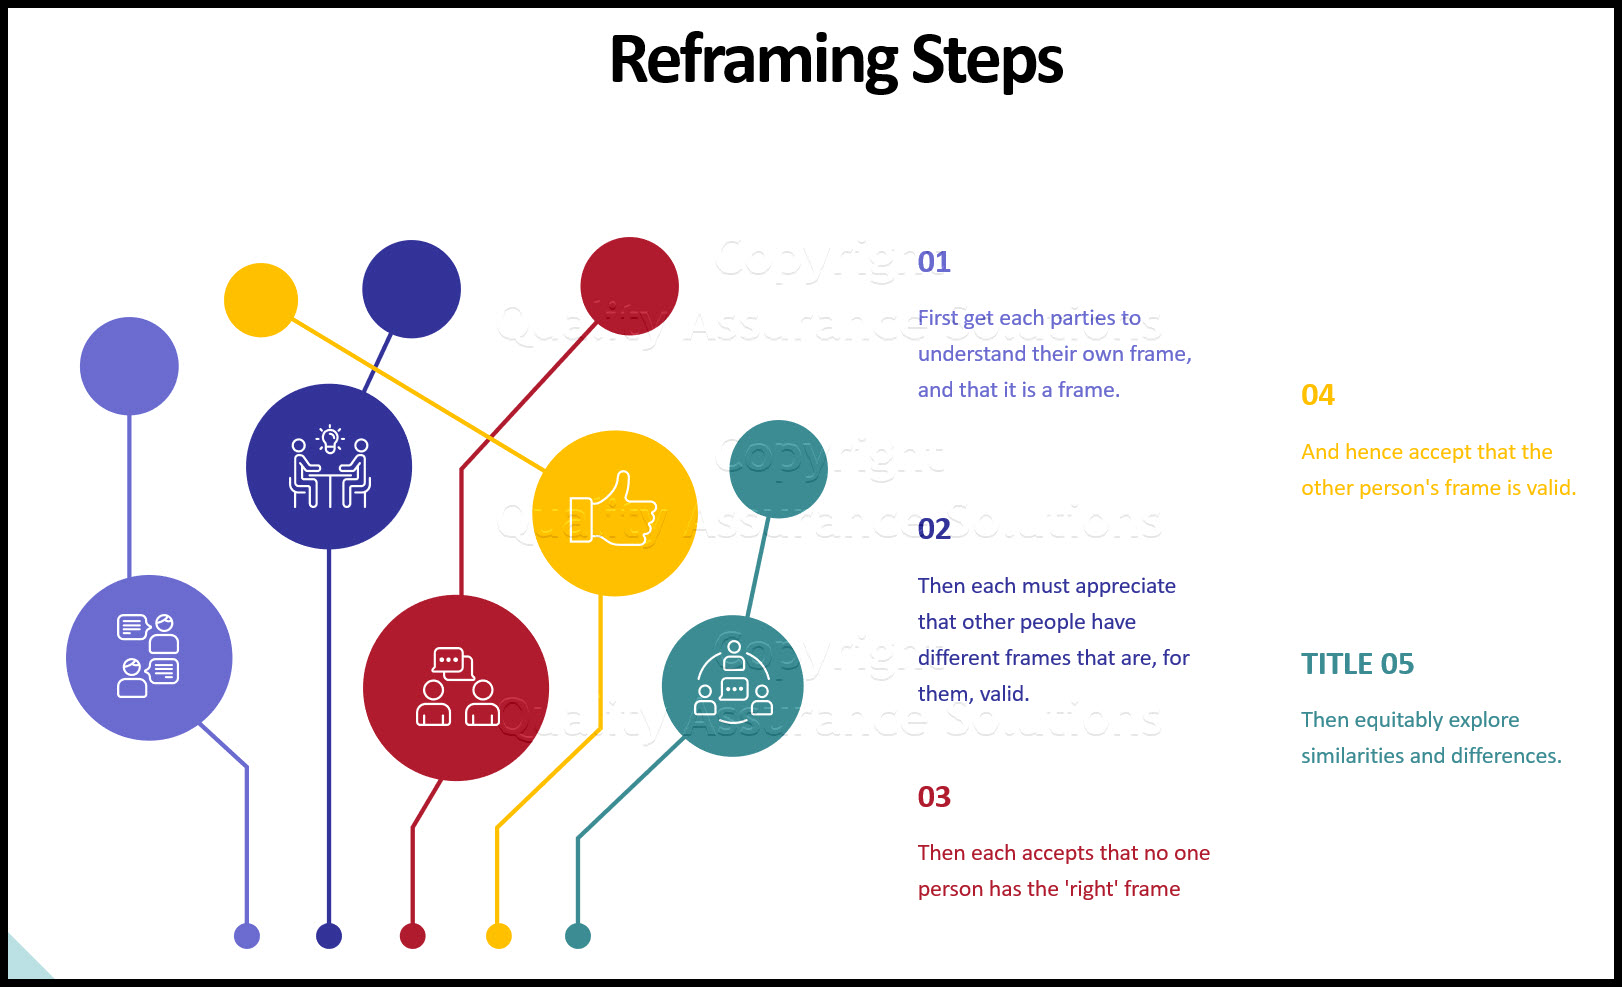 Reframing is a process that helps you find value and find answers from within the core of your team or organization.